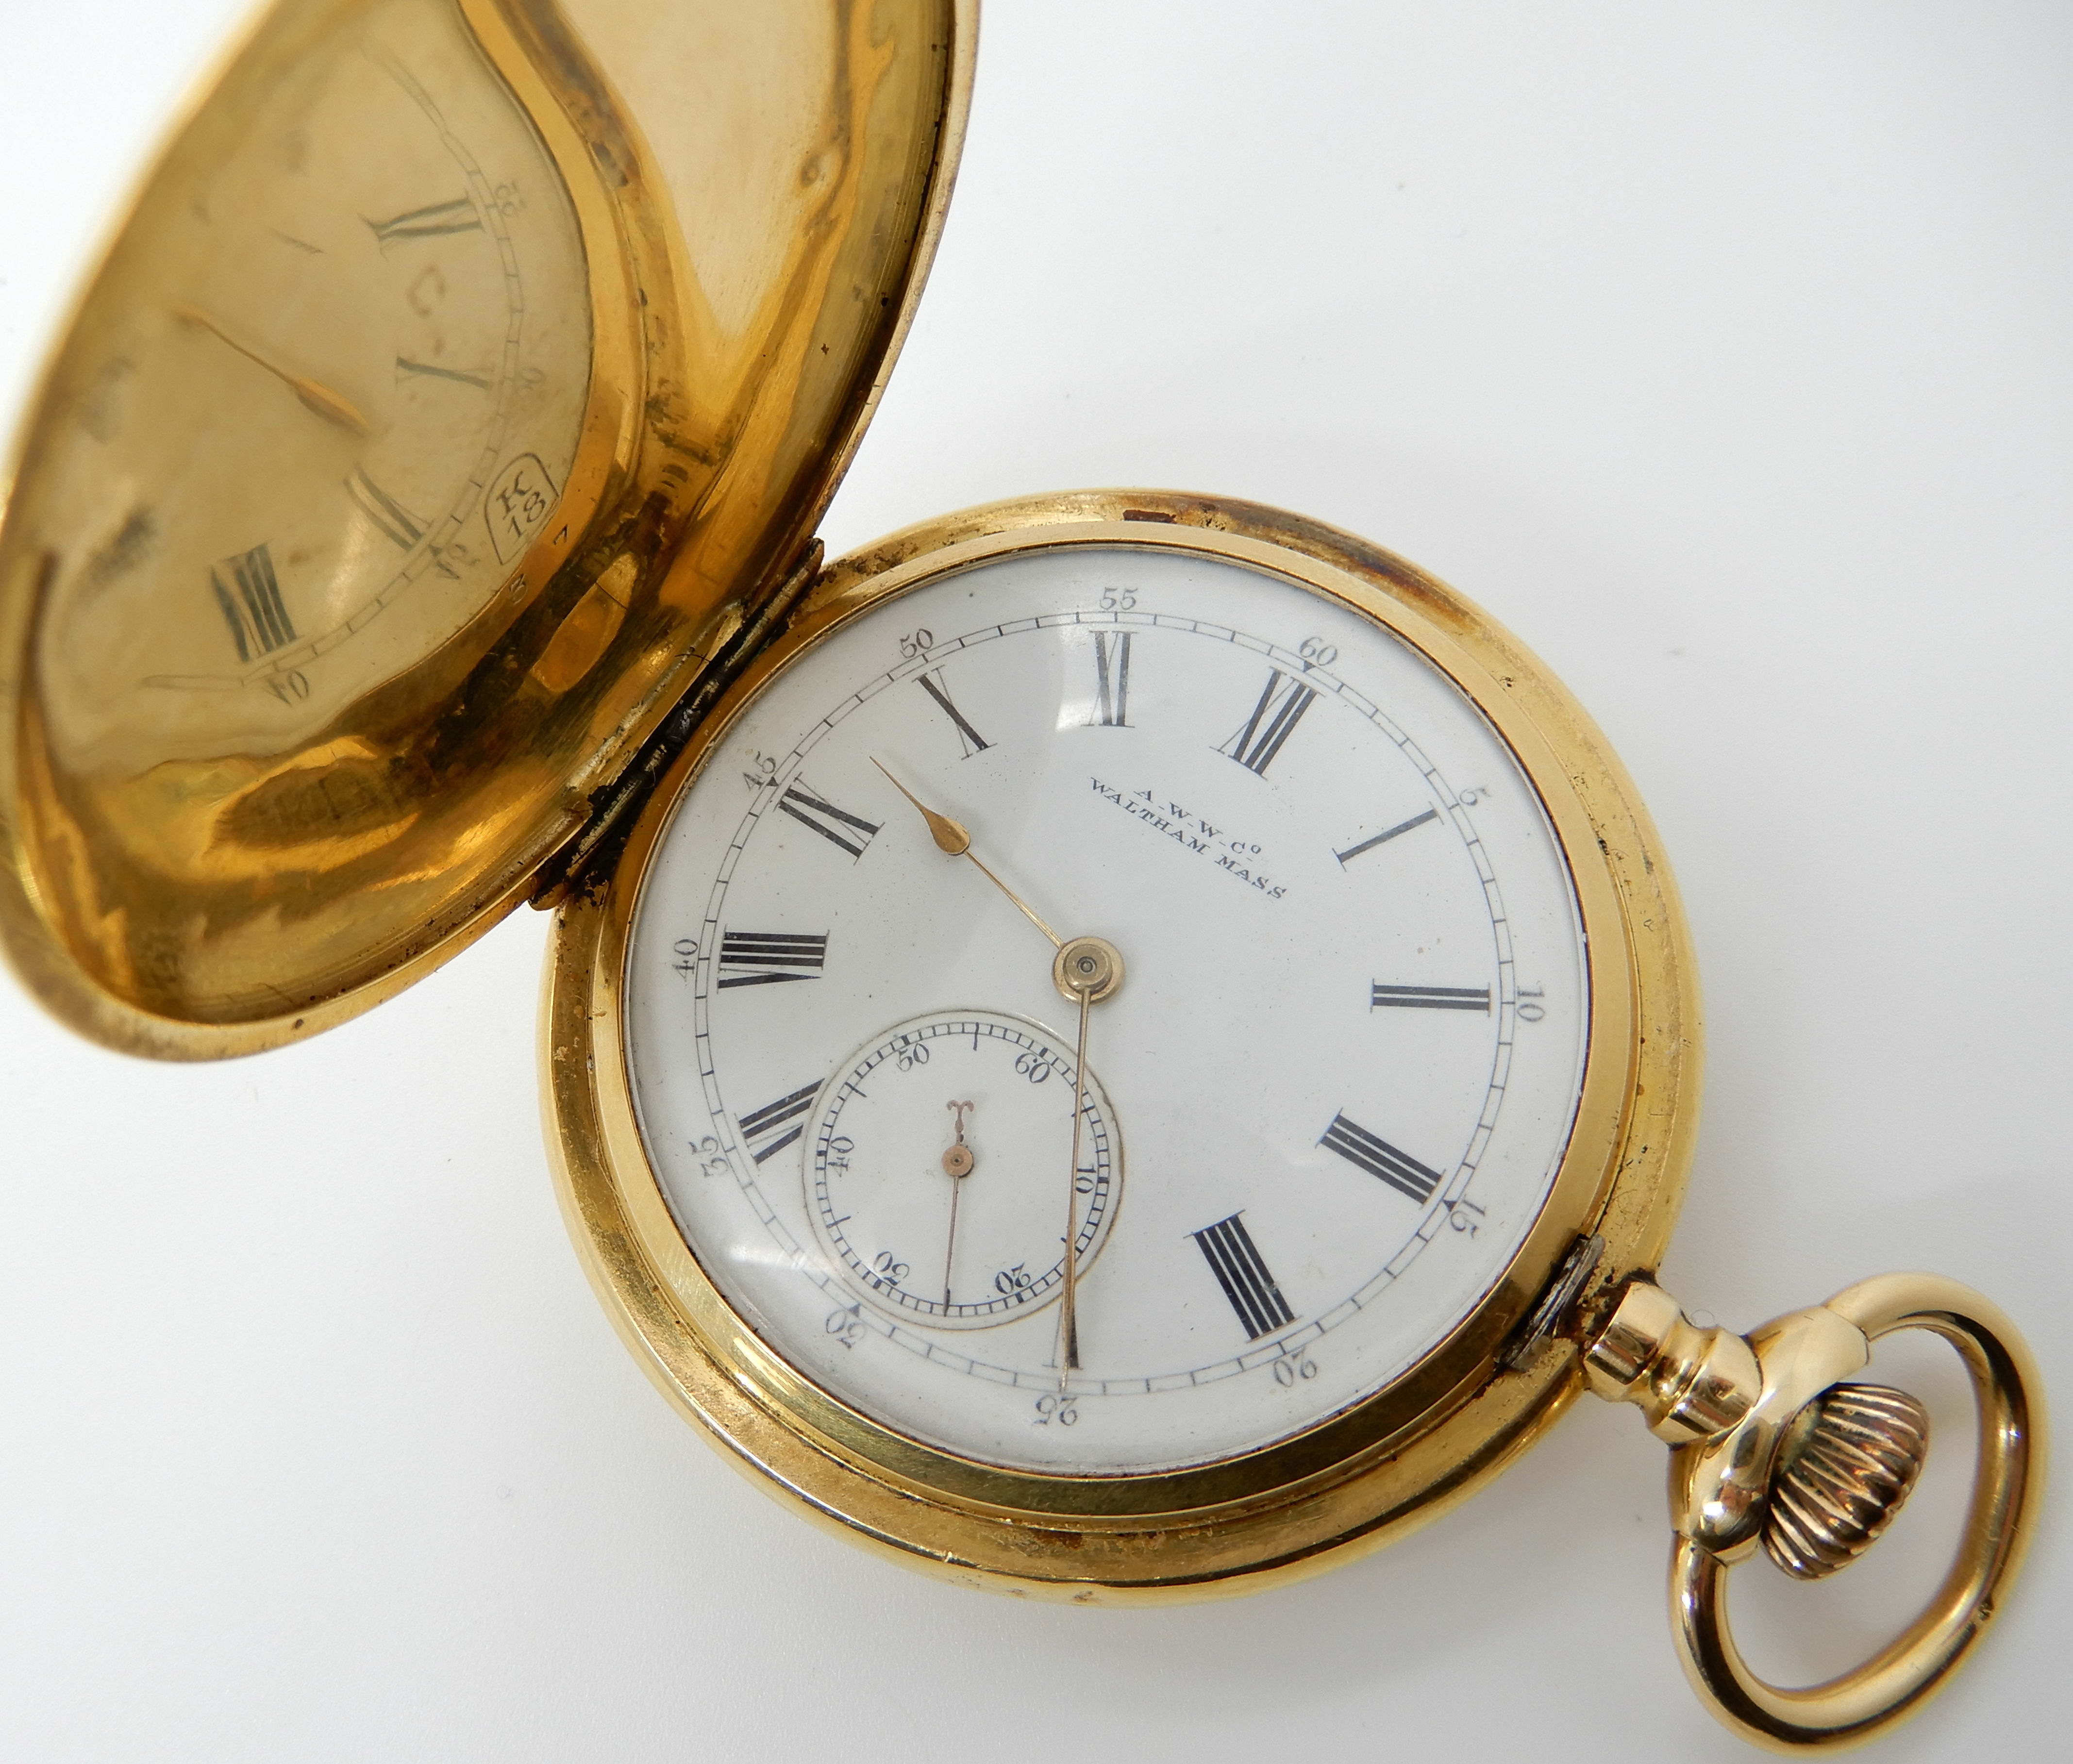 AN 18CT GOLD WALTHAM FULL HUNTER POCKET WATCH with white enamel dial, black Roman numerals, and - Image 2 of 9